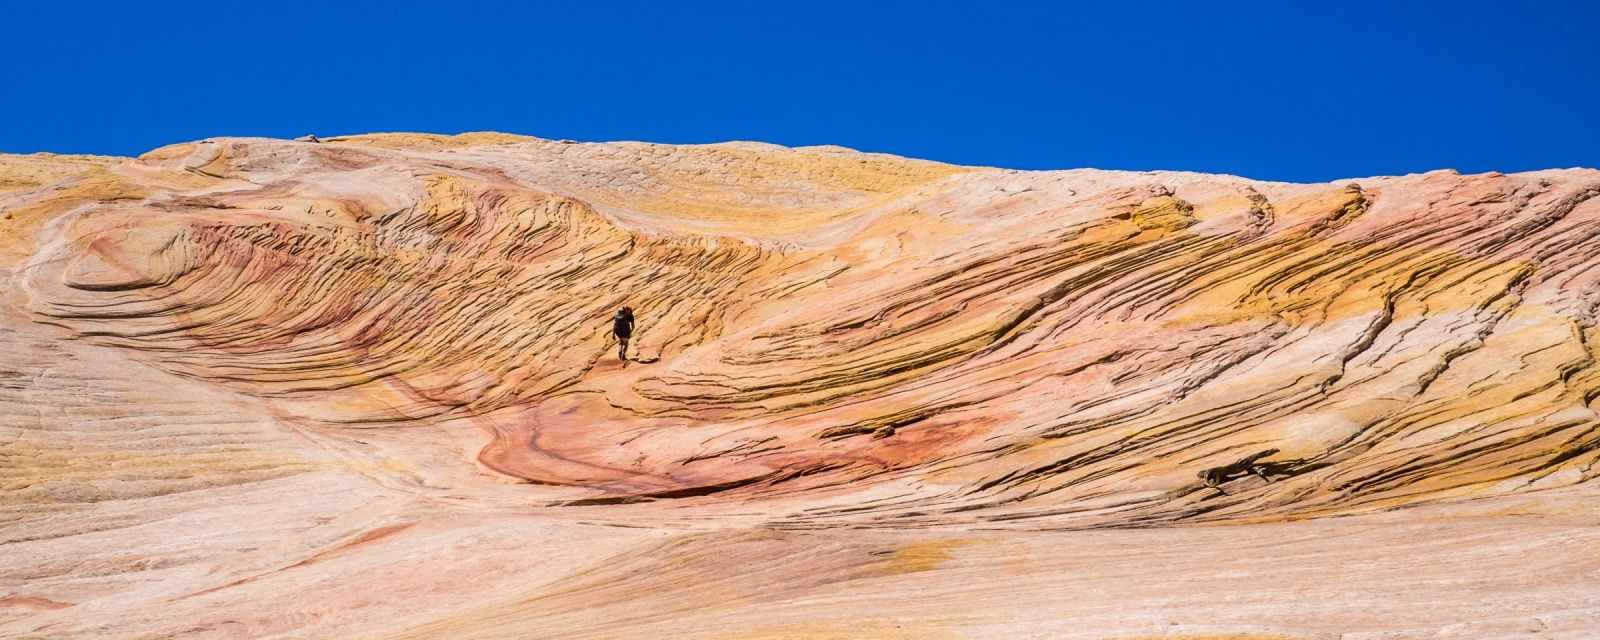 Yellow Rock - The Wave Alternative in Utah - Hiking Details and Location